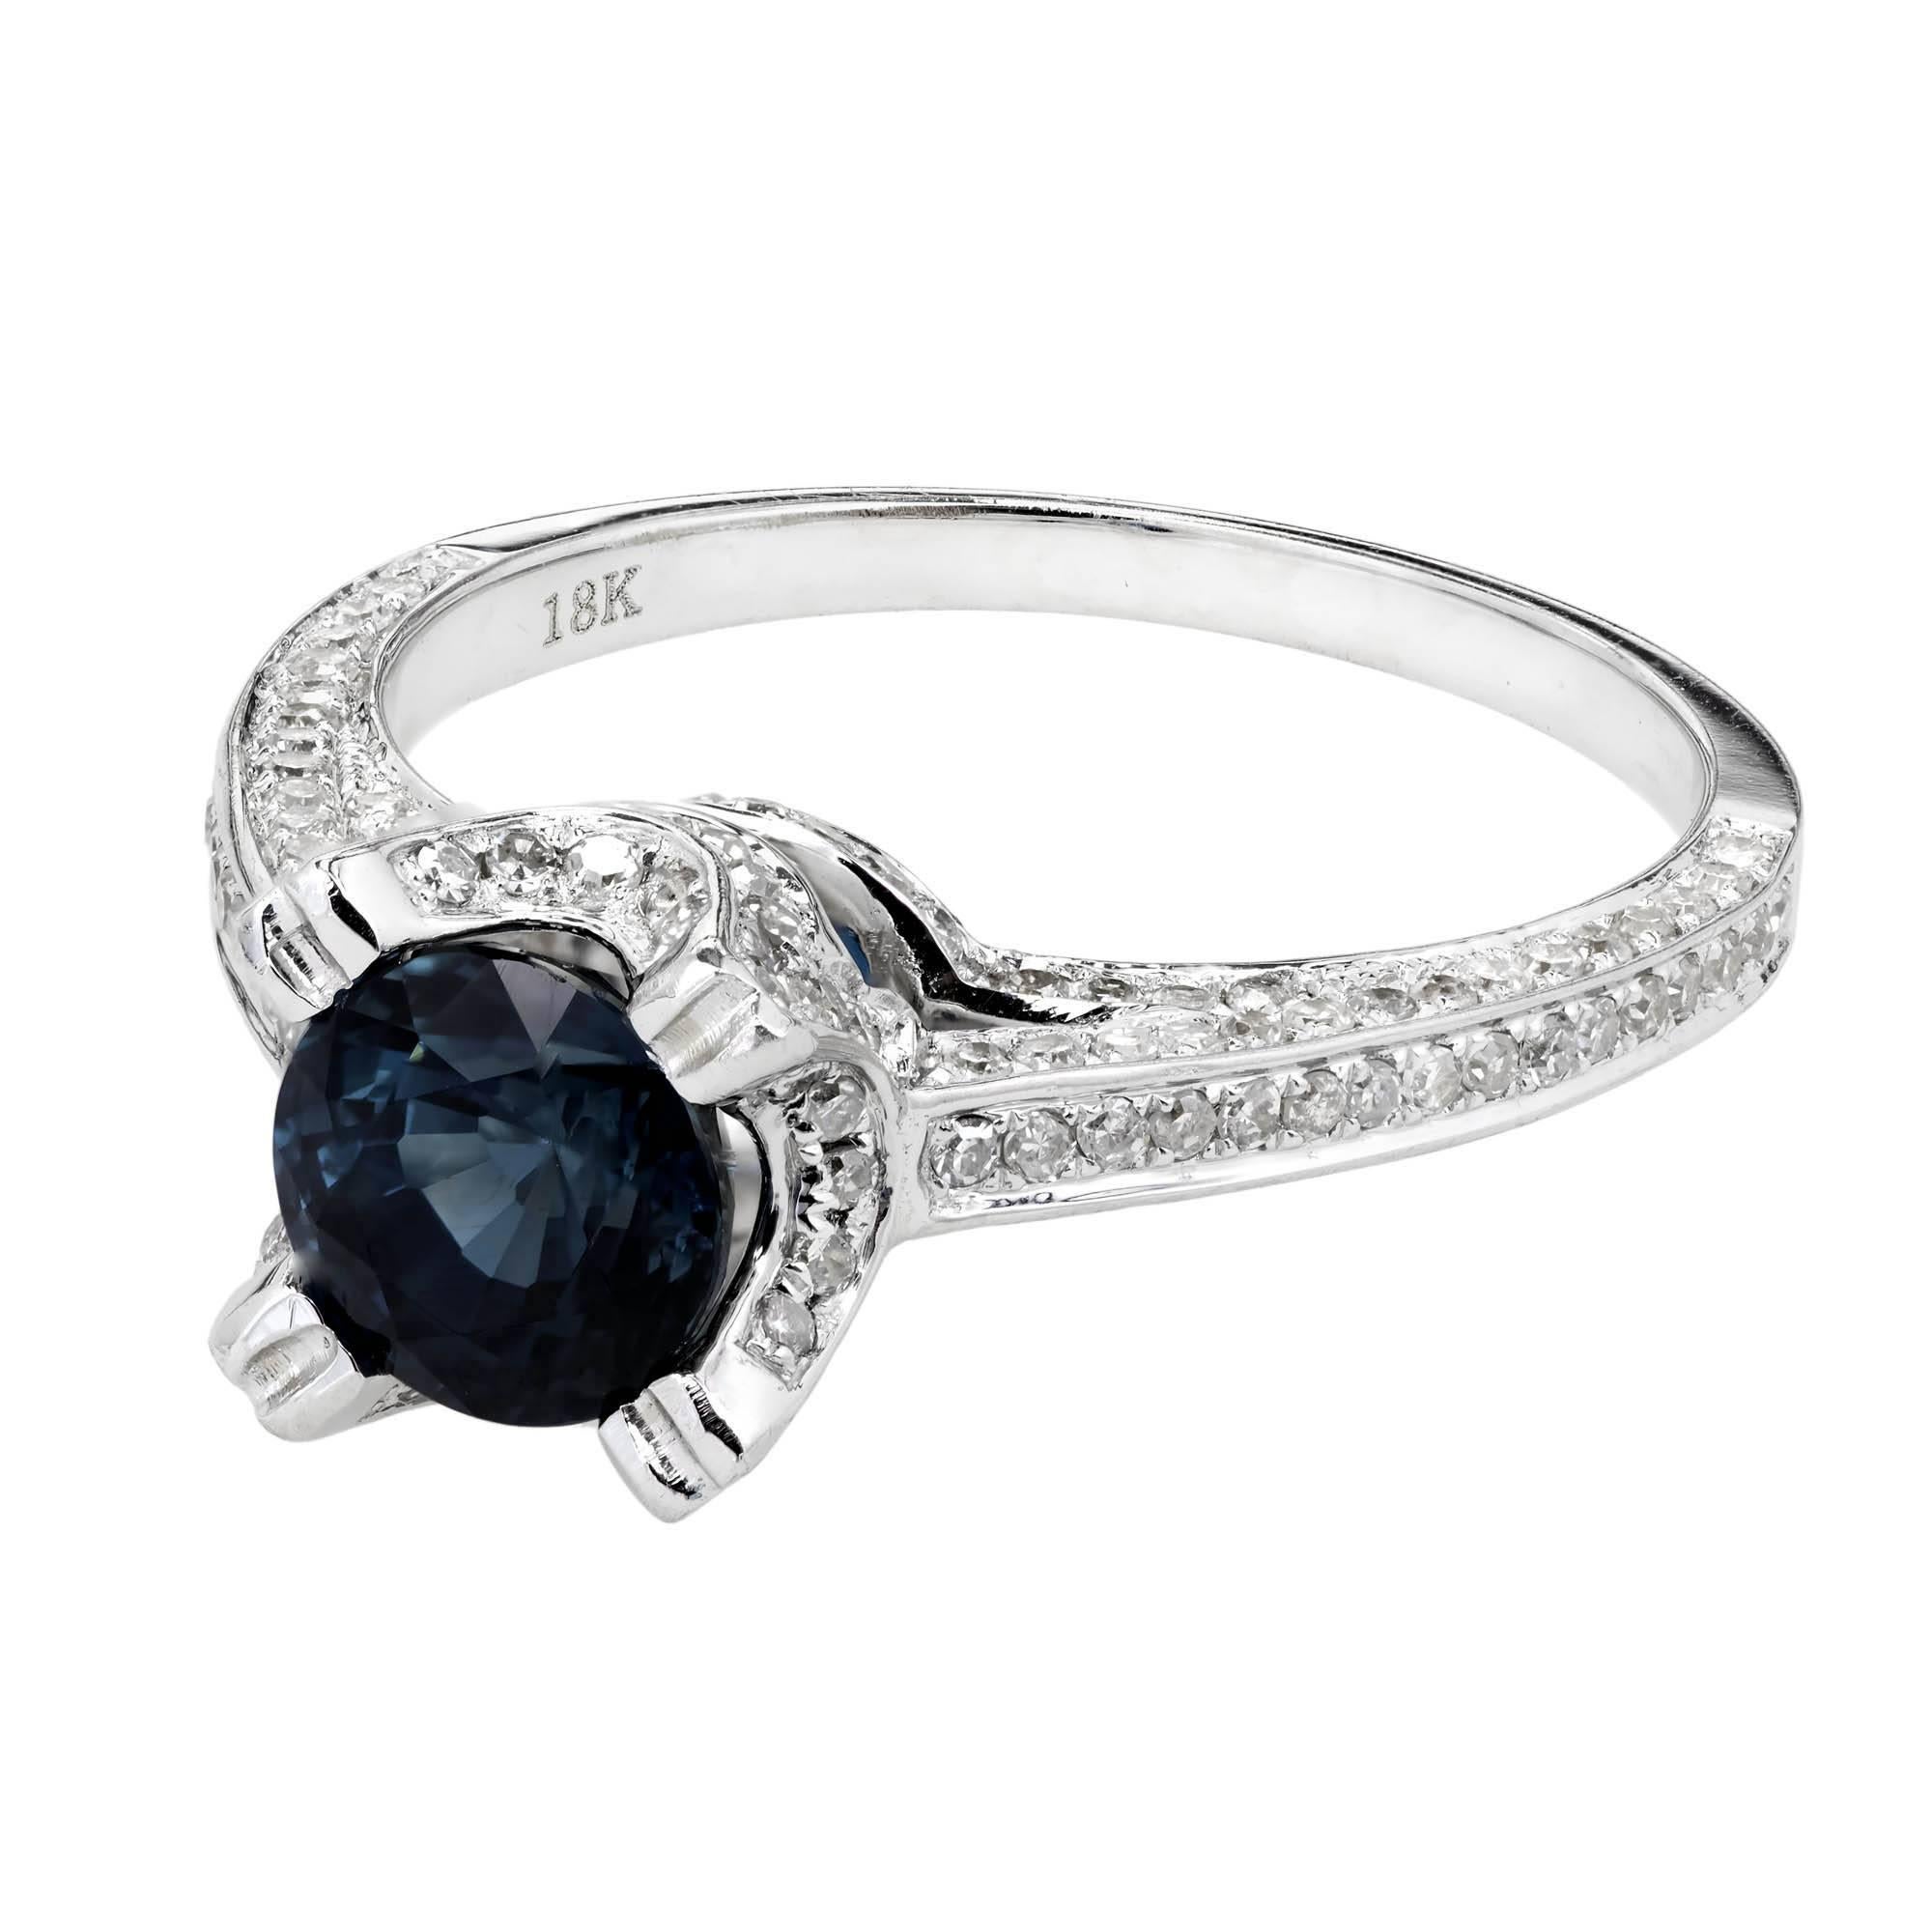 Sapphire and Micro Pavé diamond 18k white gold engagement ring. GIA certificate # 5181238349 certified natural corundum simple heat only, no other enhancement.

1 round sapphire approx. total weight 1.20cts
152 round full cut Diamonds, approx. total